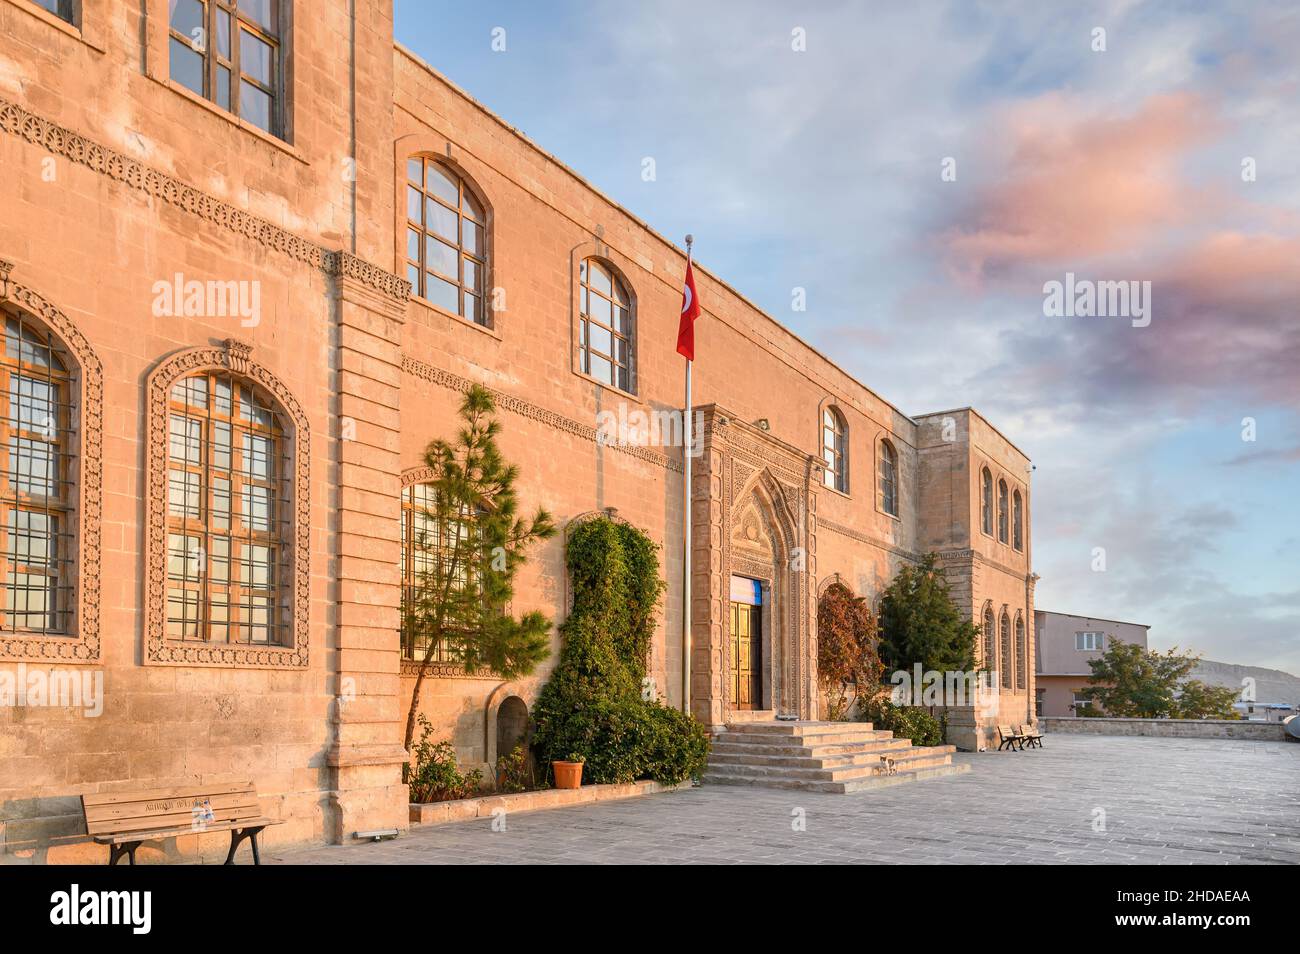 The Maturity Institute in the old town of Mardin, Turkey Stock Photo